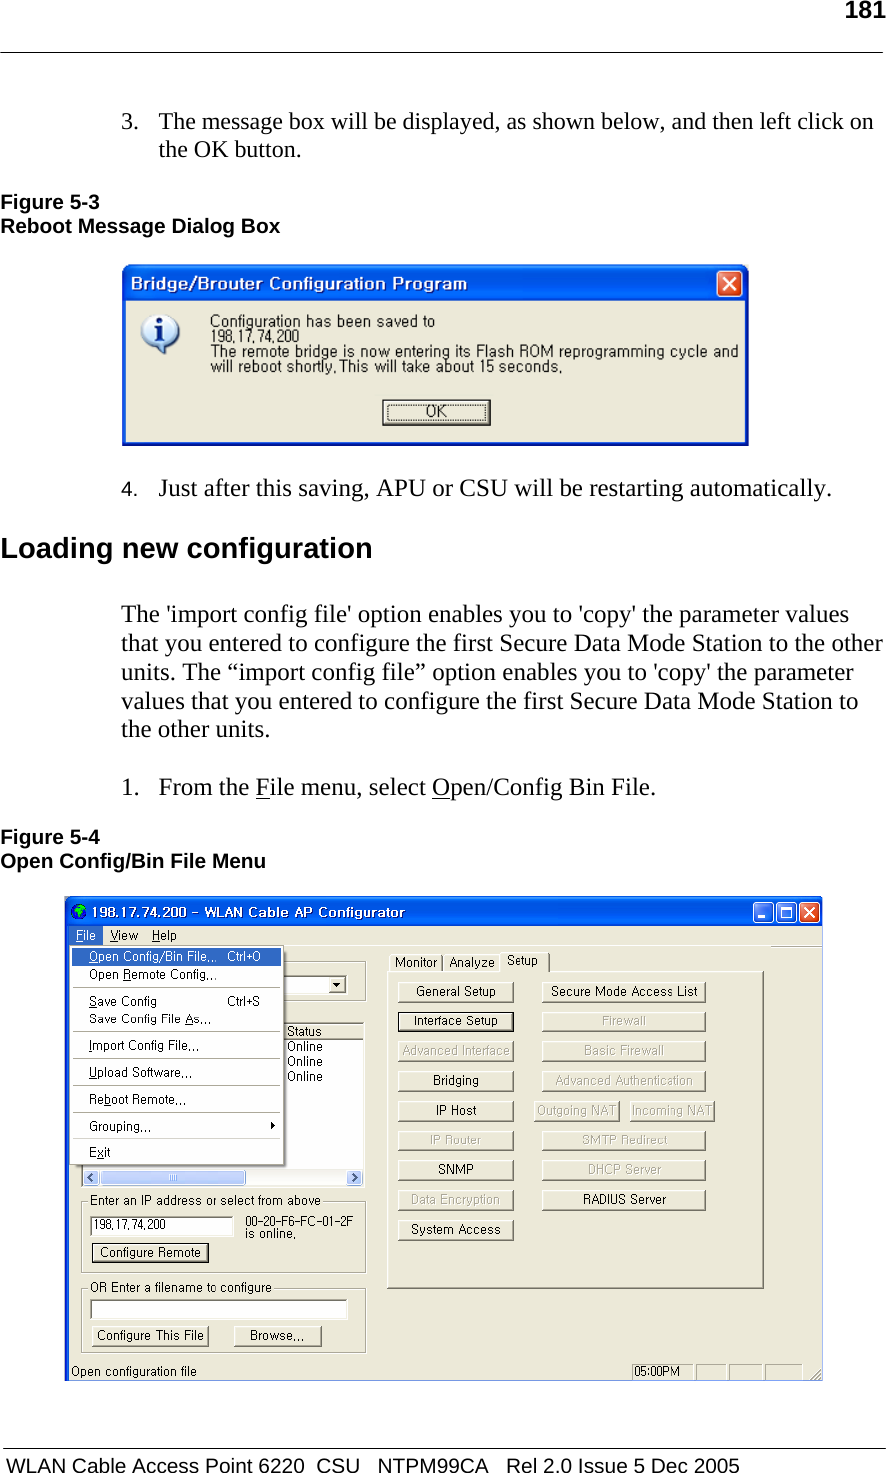   181   WLAN Cable Access Point 6220  CSU   NTPM99CA   Rel 2.0 Issue 5 Dec 2005 3. The message box will be displayed, as shown below, and then left click on the OK button.  Figure 5-3 Reboot Message Dialog Box    4.  Just after this saving, APU or CSU will be restarting automatically.  Loading new configuration  The &apos;import config file&apos; option enables you to &apos;copy&apos; the parameter values that you entered to configure the first Secure Data Mode Station to the other units. The “import config file” option enables you to &apos;copy&apos; the parameter values that you entered to configure the first Secure Data Mode Station to the other units.  1. From the File menu, select Open/Config Bin File.  Figure 5-4 Open Config/Bin File Menu    